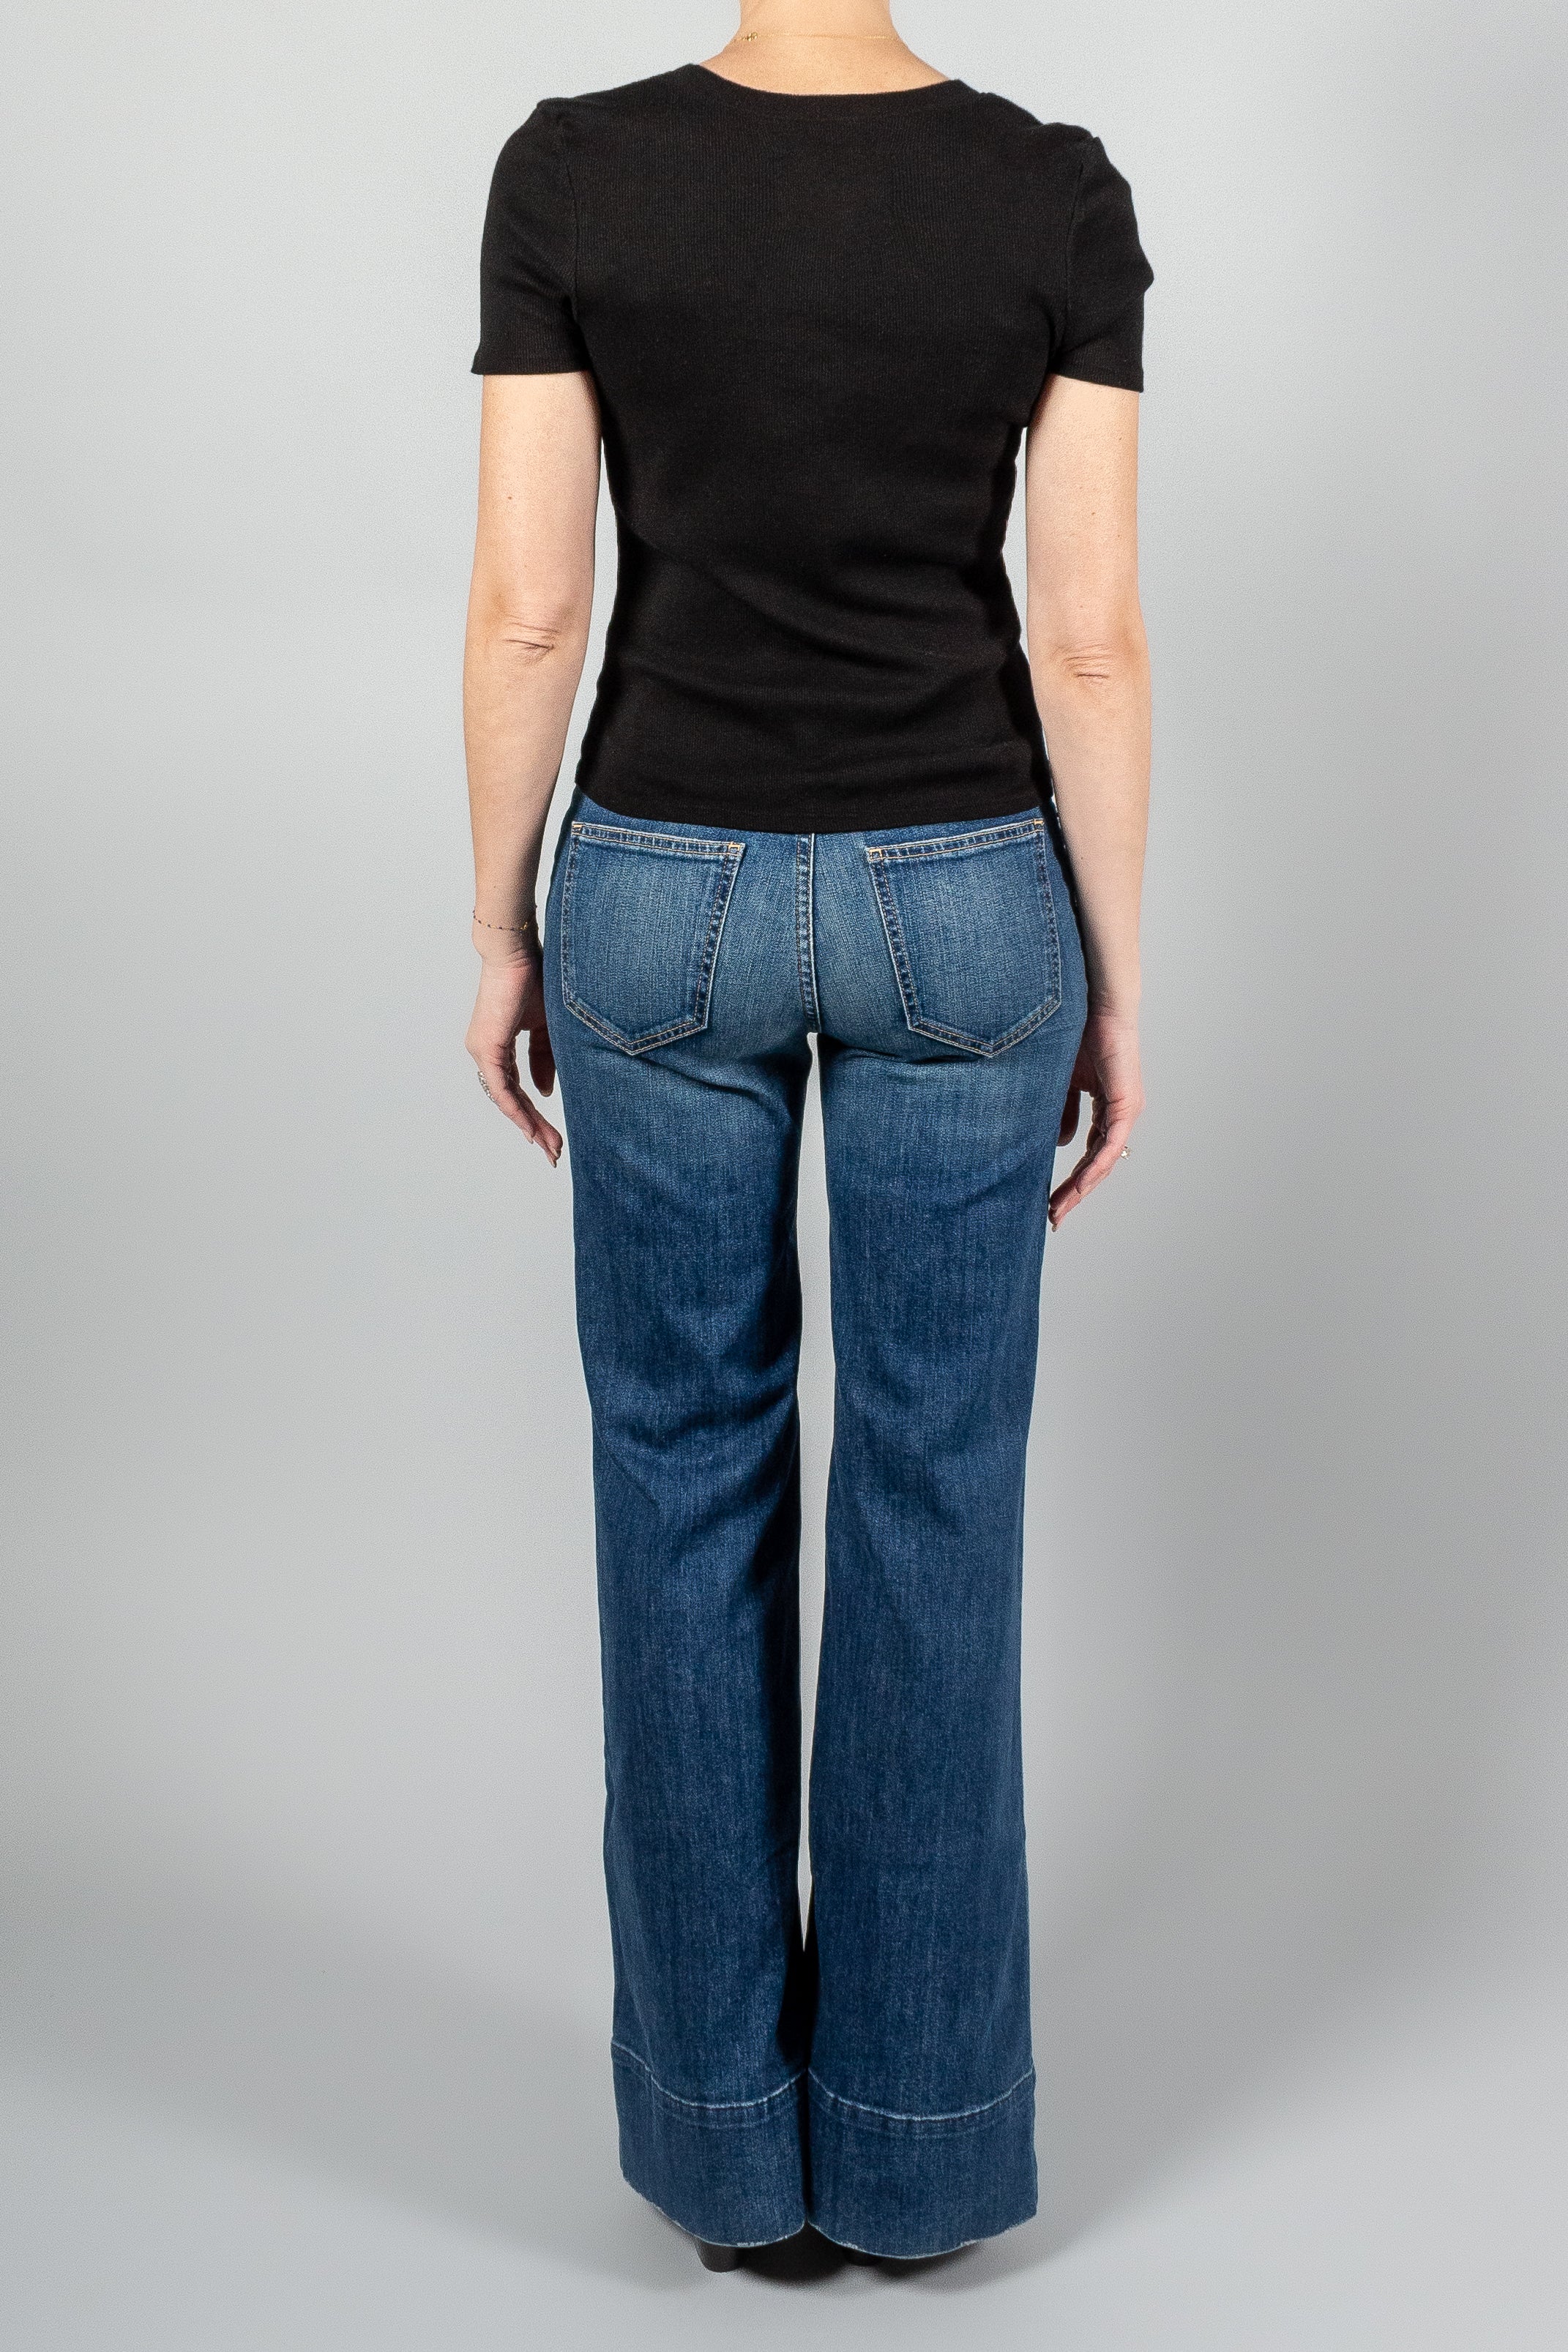 Nili Lotan Nadege Jean-Pants and Shorts-Misch-Boutique-Vancouver-Canada-misch.ca